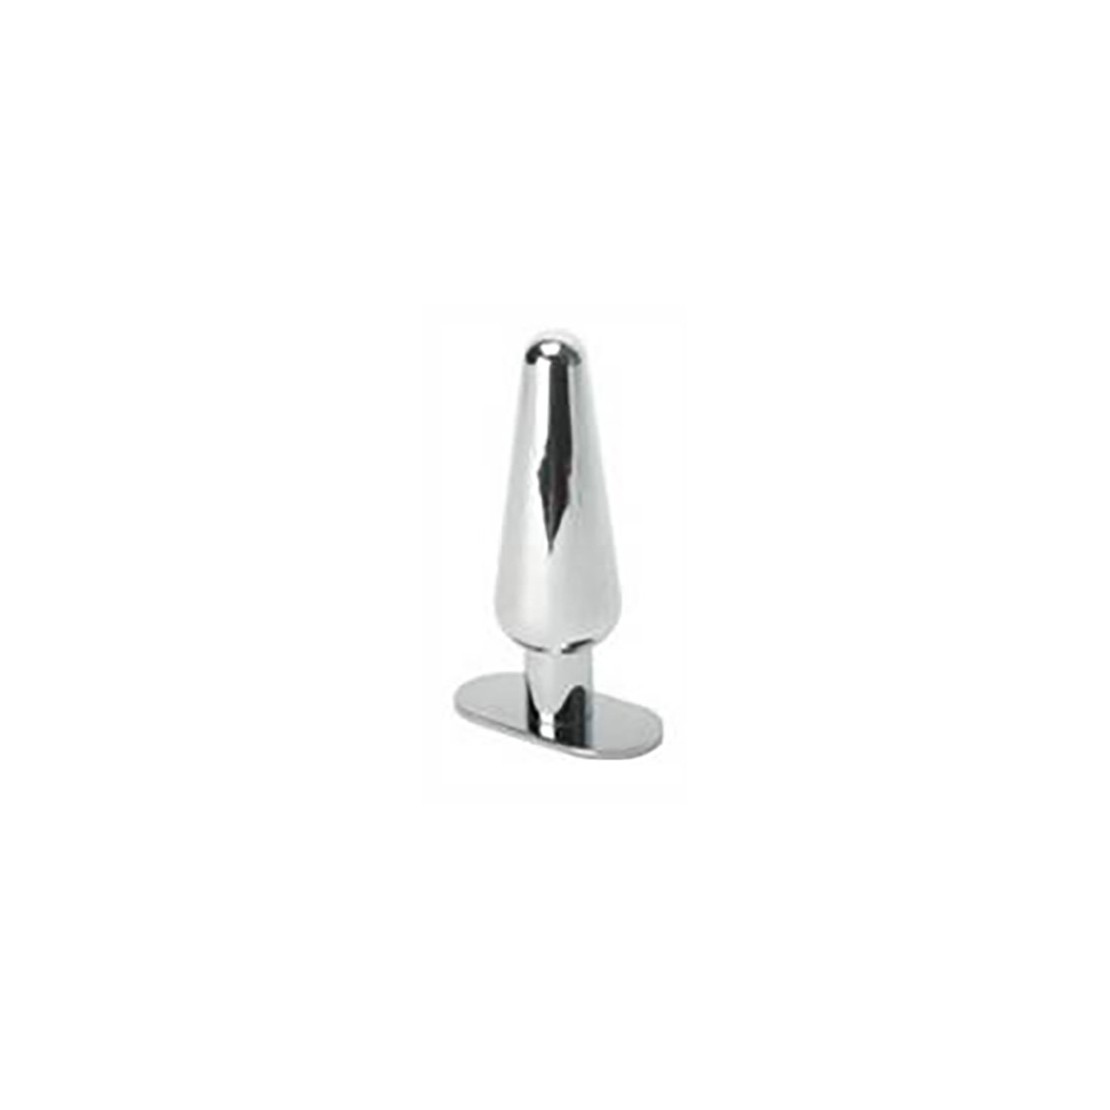 BUTT PLUG- MEDIUM TAPPO ANALE STAINLESS STEEL